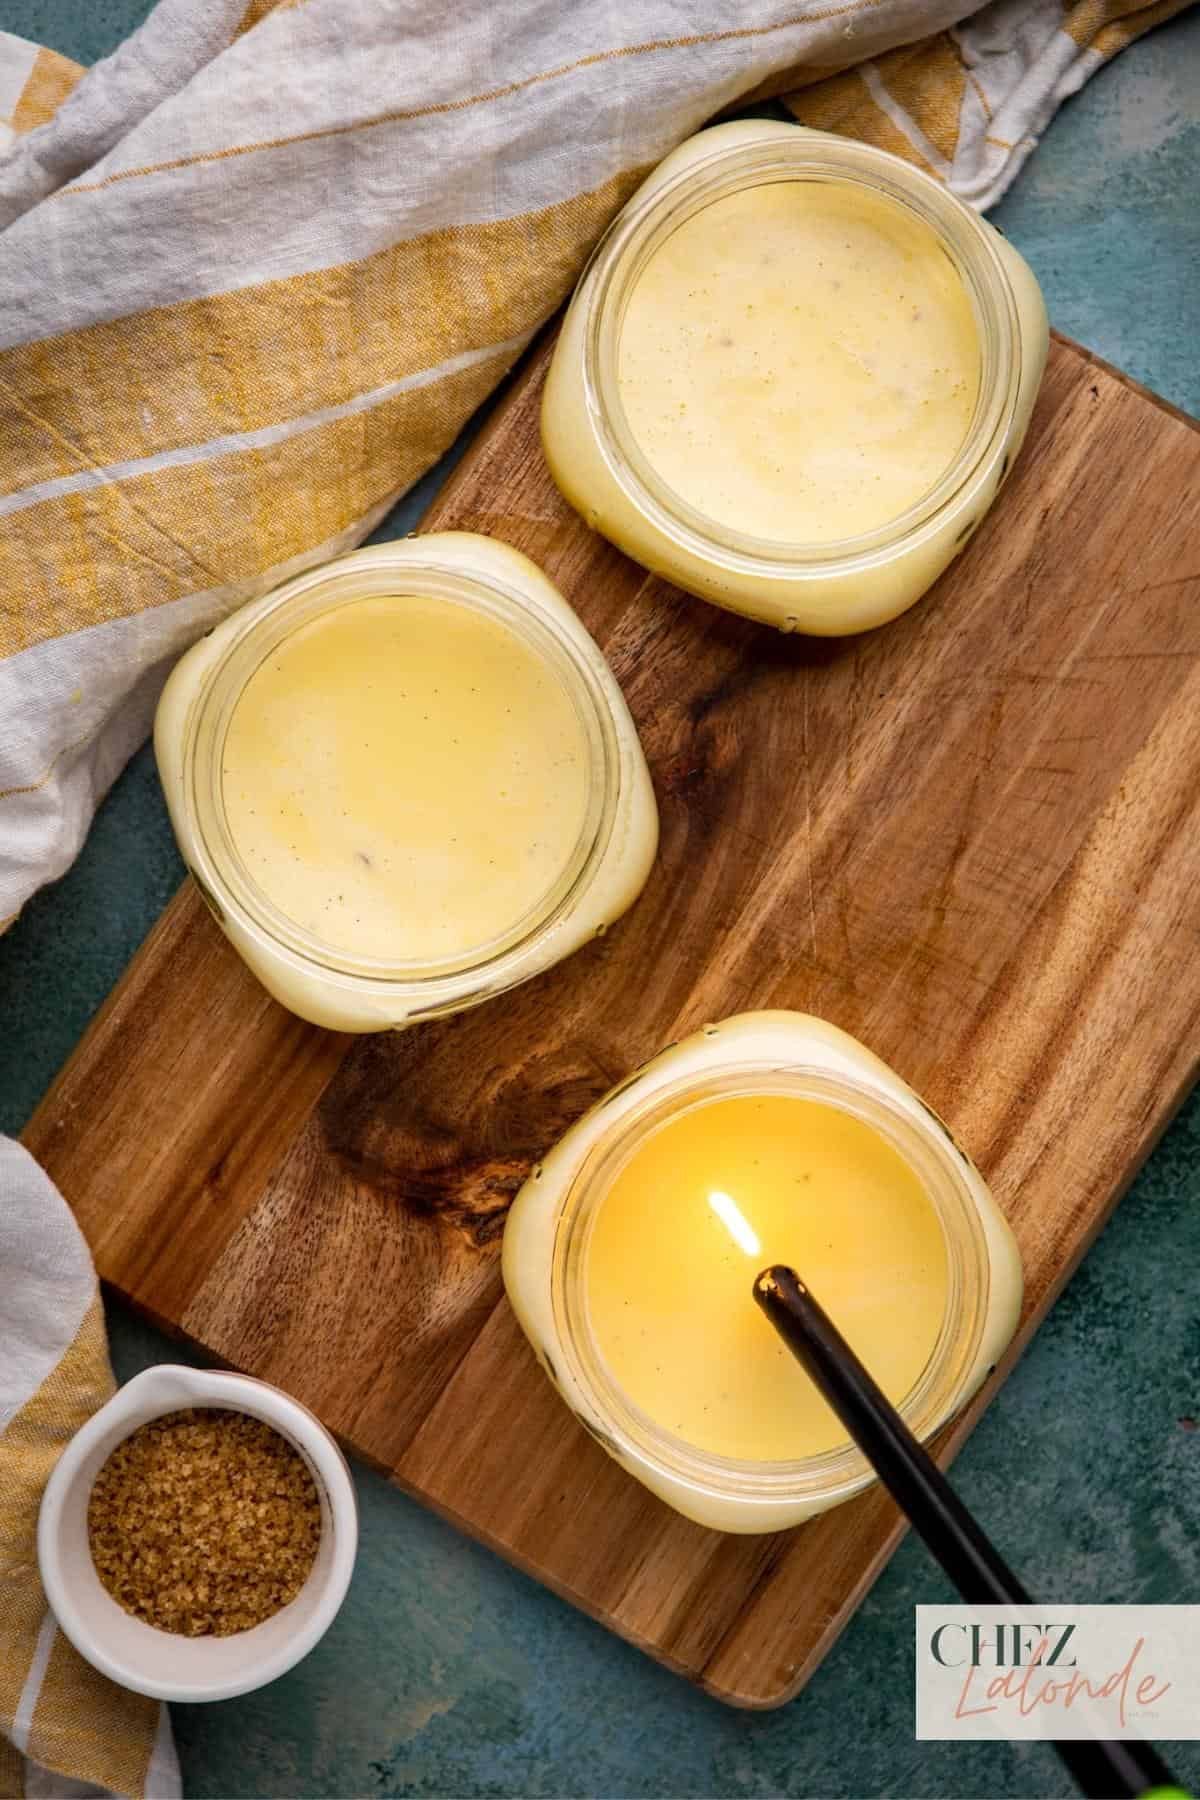 Use a lighter to smooth out bubble on the custard surface. 